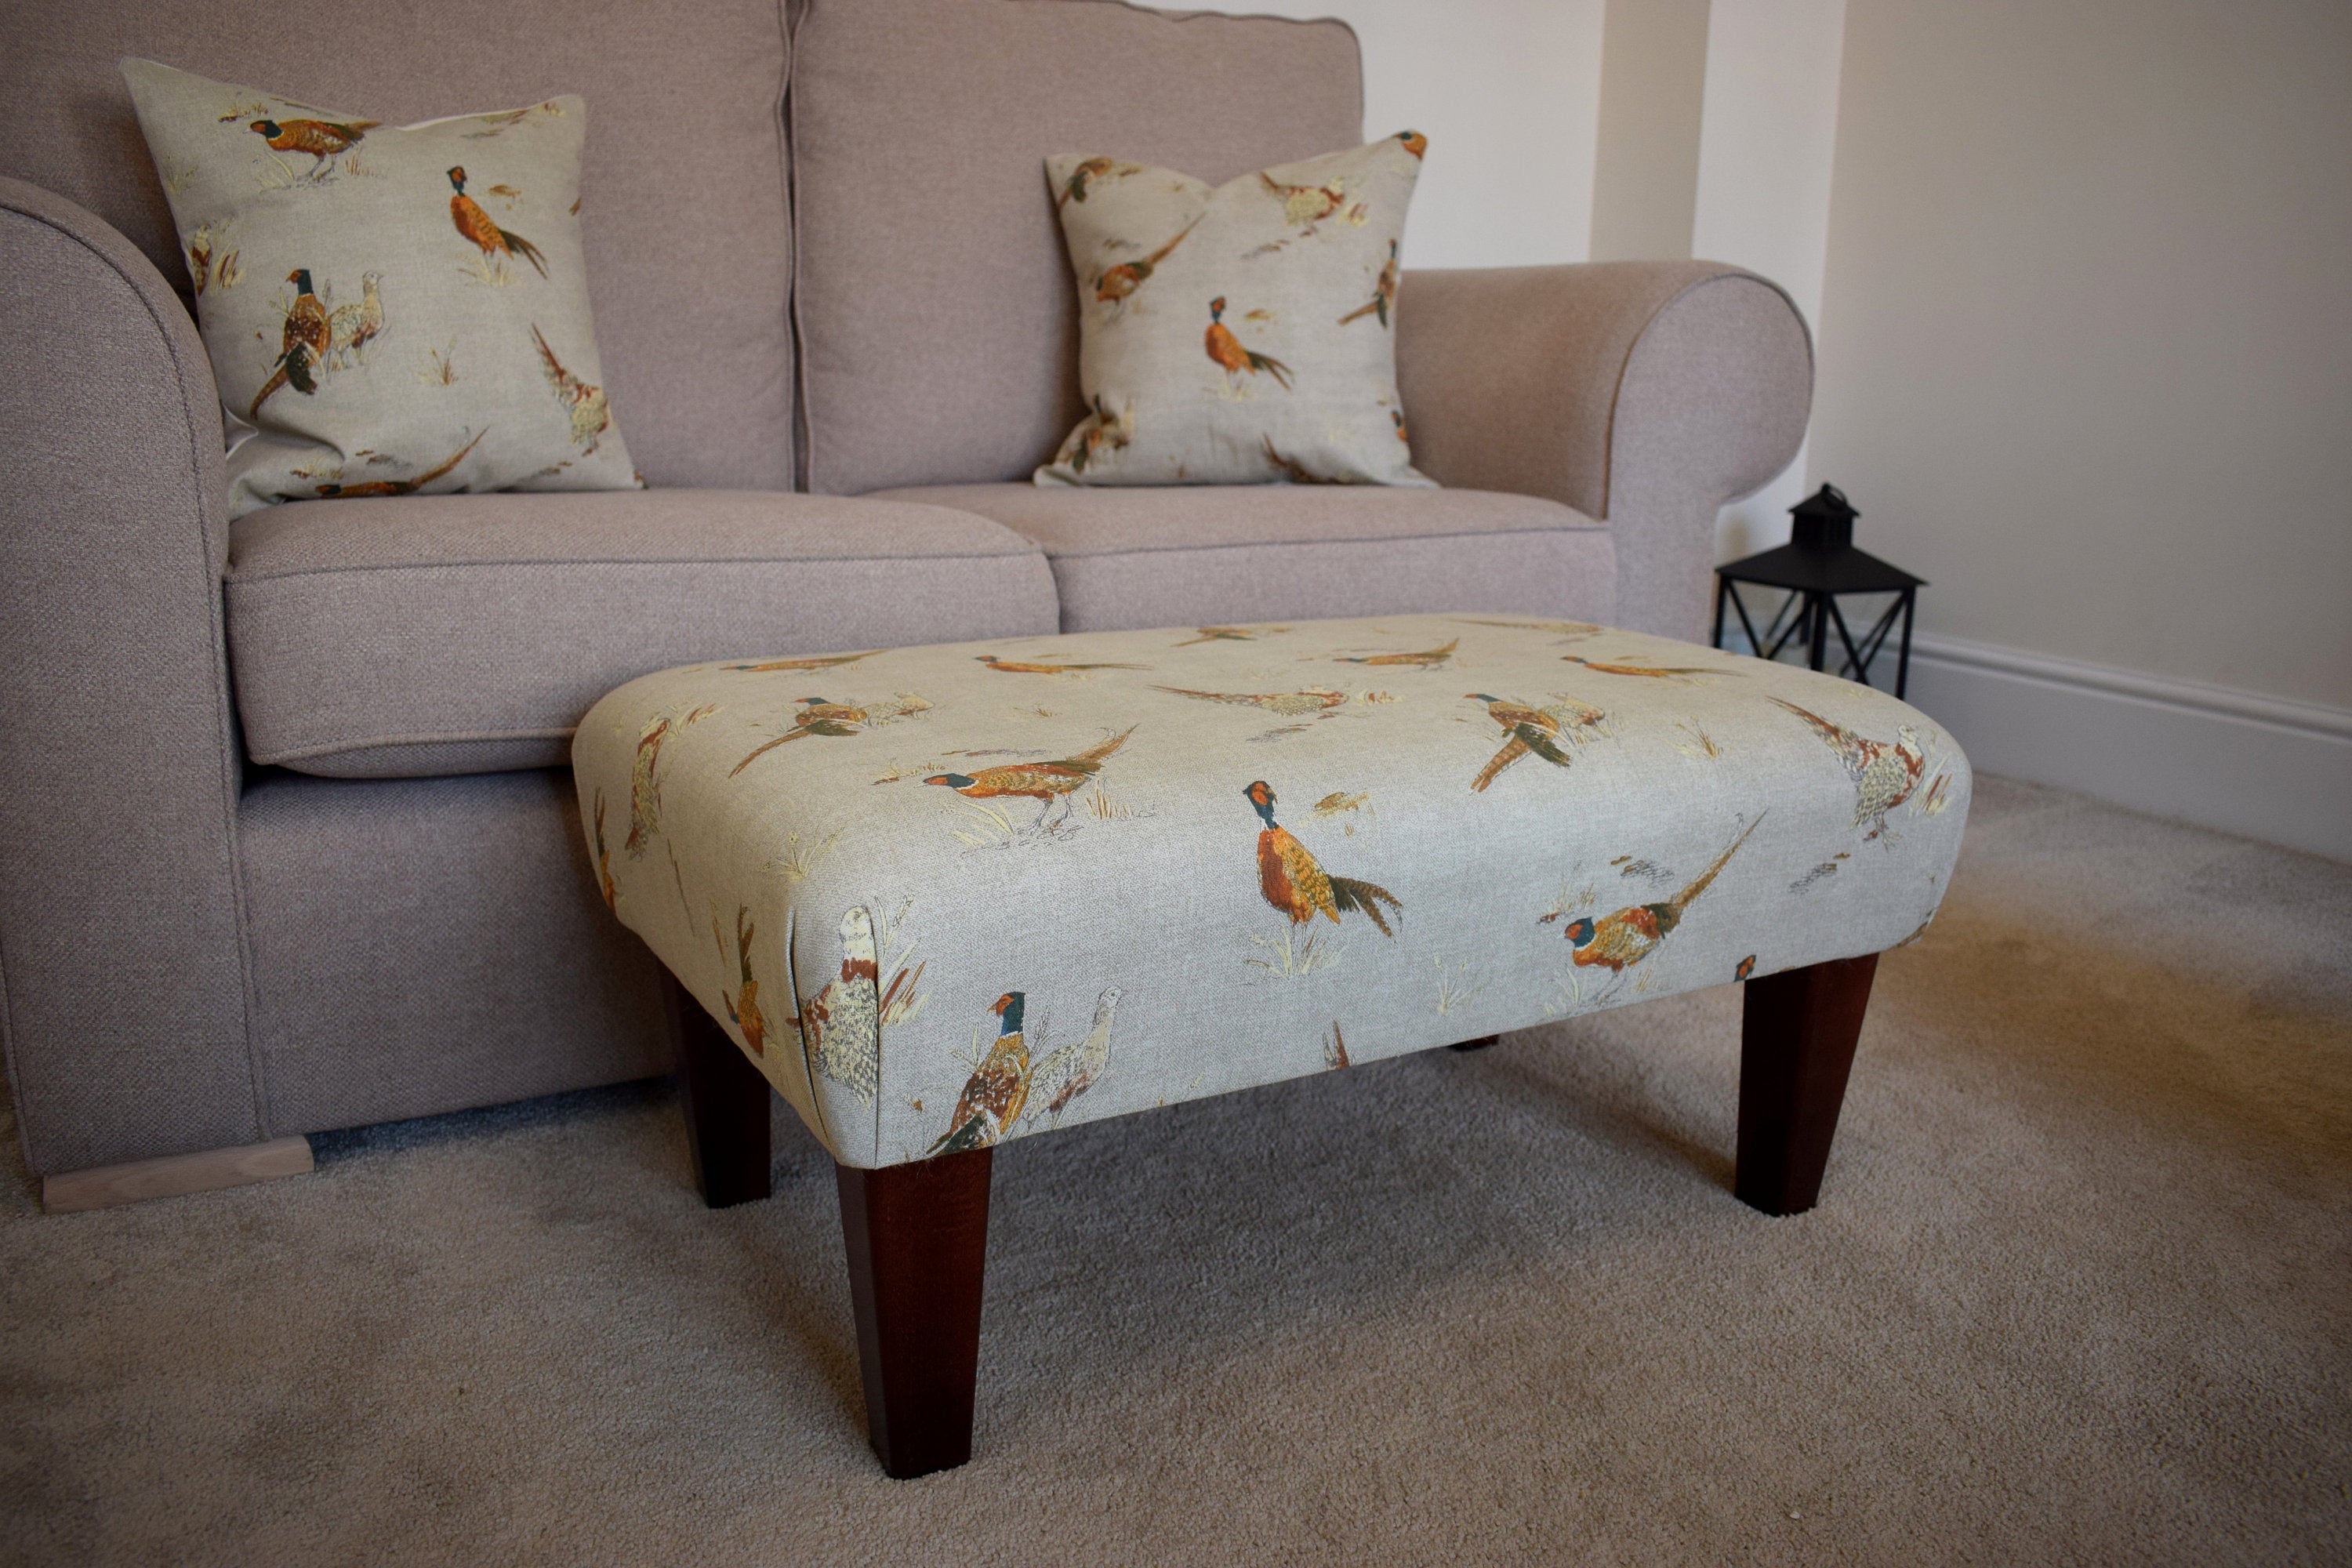 Large Footstool - Pheasant Fabric - Straight or Turned Mahogany, Waxed or Natural Legs